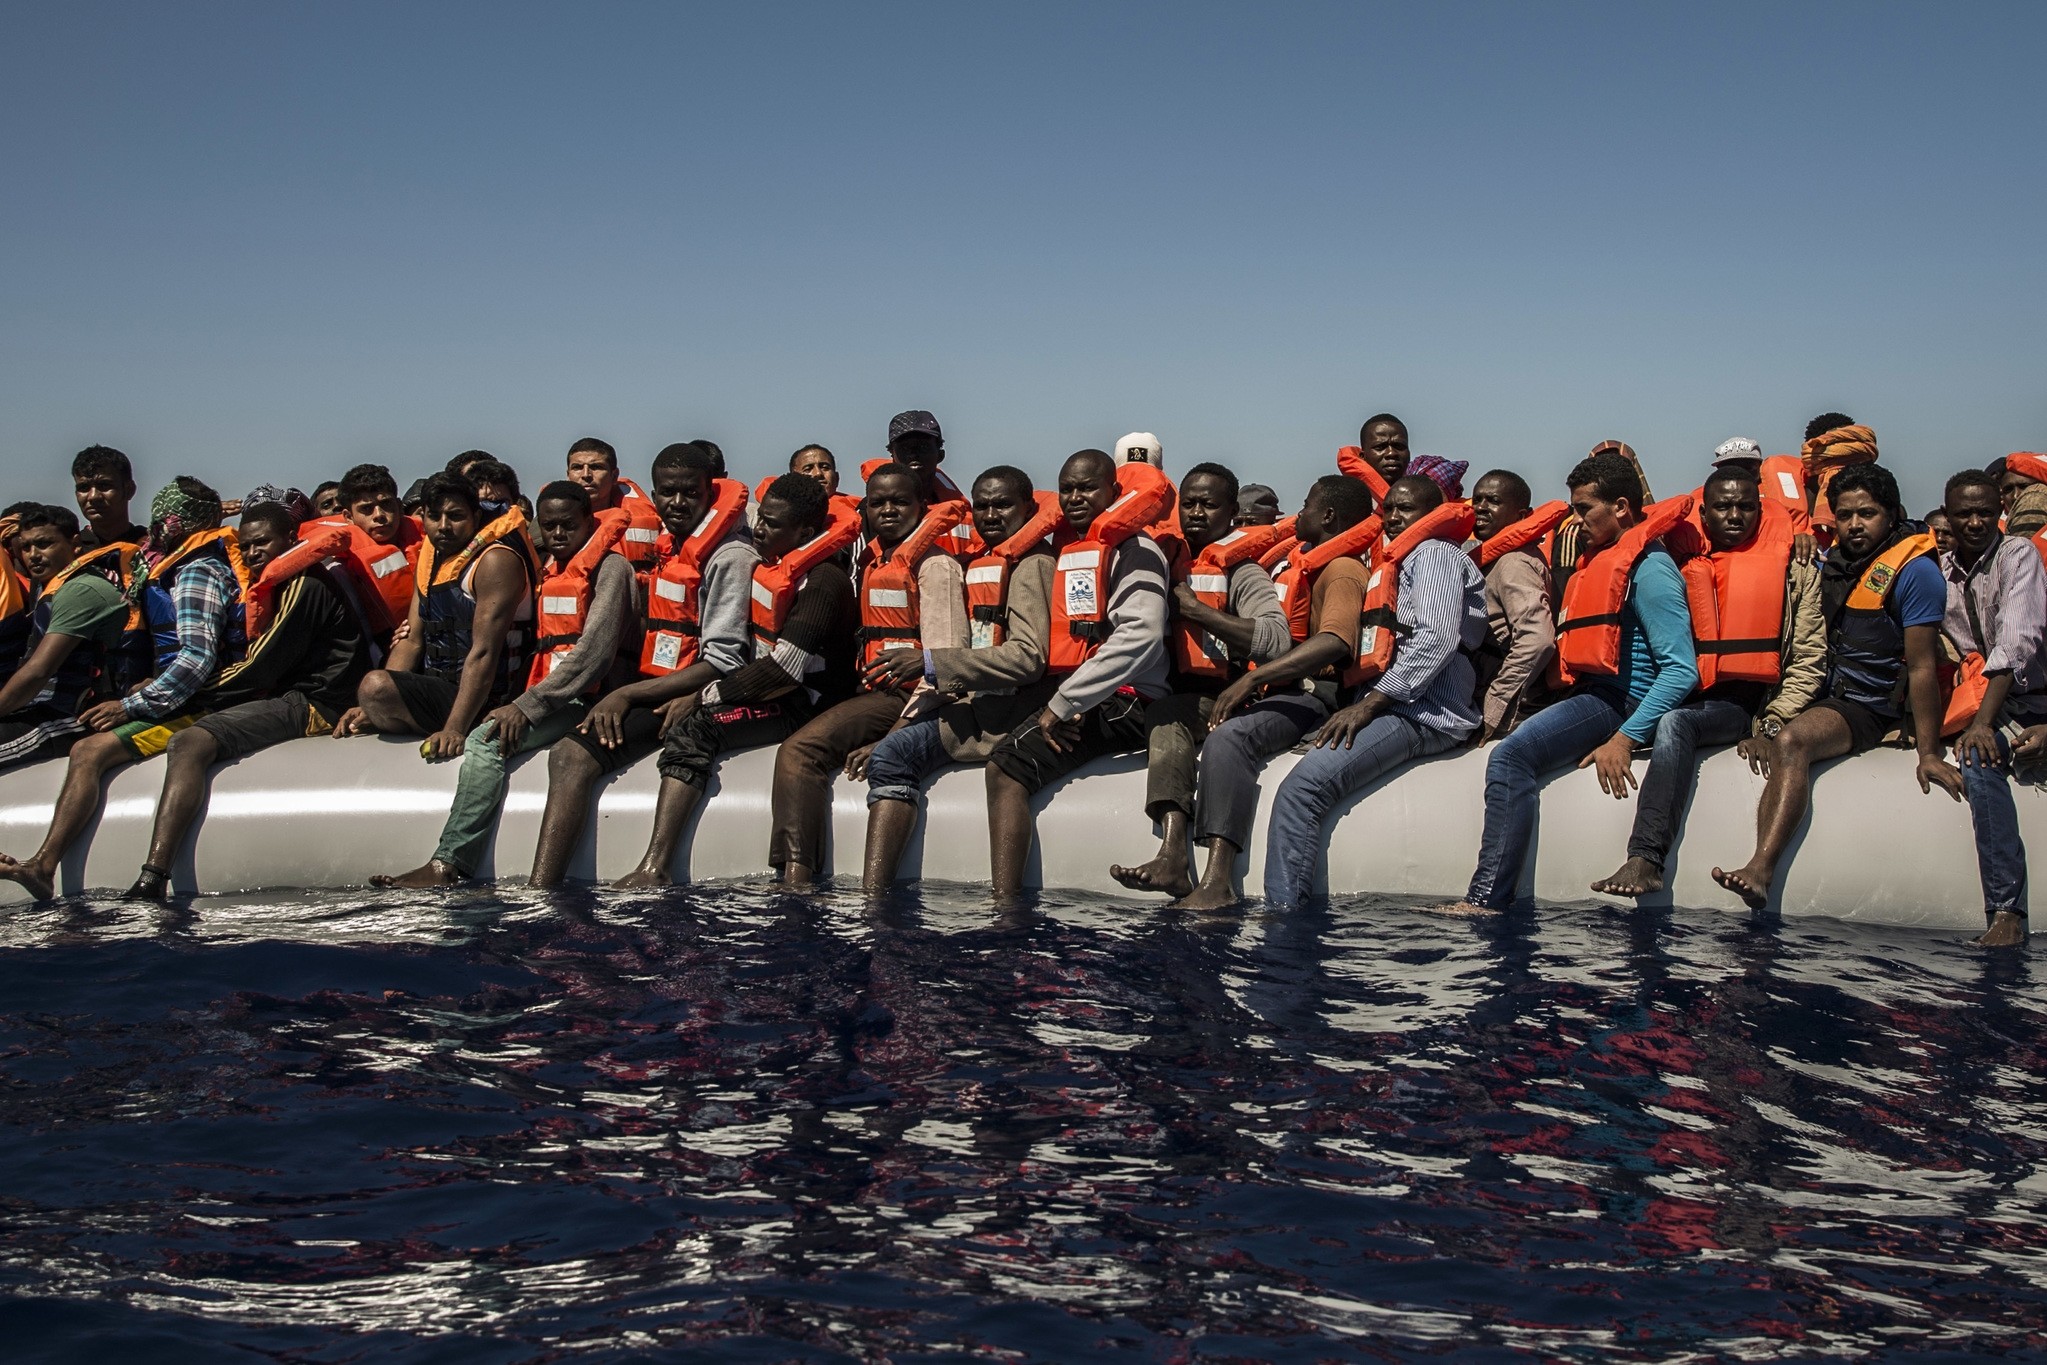 In this Tuesday July 19, 2016 photo, refugees and migrants from Eritrea, Mali, Bangladesh and other countries wait on board a dinghy to be rescued in the Mediterranean Sea, 27 kilometers (17 miles) north of Sabratha, Libya. (AP Photo)